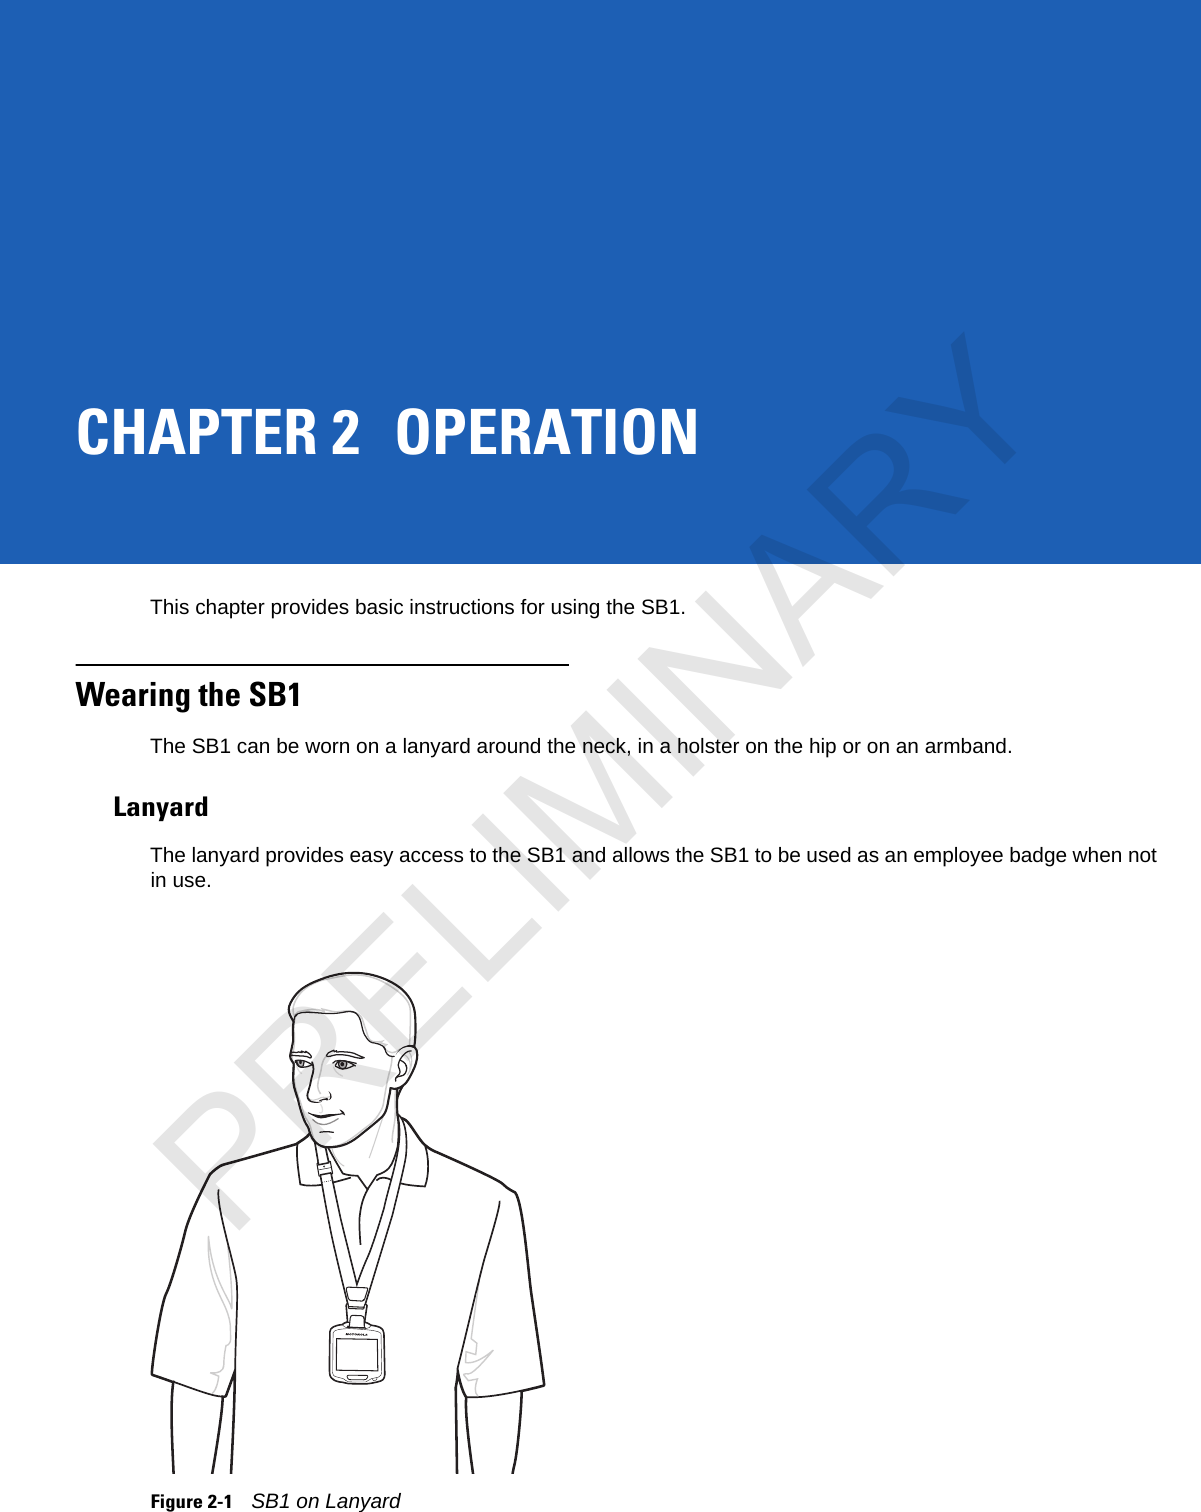 CHAPTER 2 OPERATIONThis chapter provides basic instructions for using the SB1.Wearing the SB1The SB1 can be worn on a lanyard around the neck, in a holster on the hip or on an armband.LanyardThe lanyard provides easy access to the SB1 and allows the SB1 to be used as an employee badge when not in use. Figure 2-1SB1 on LanyardPRELIMINARY